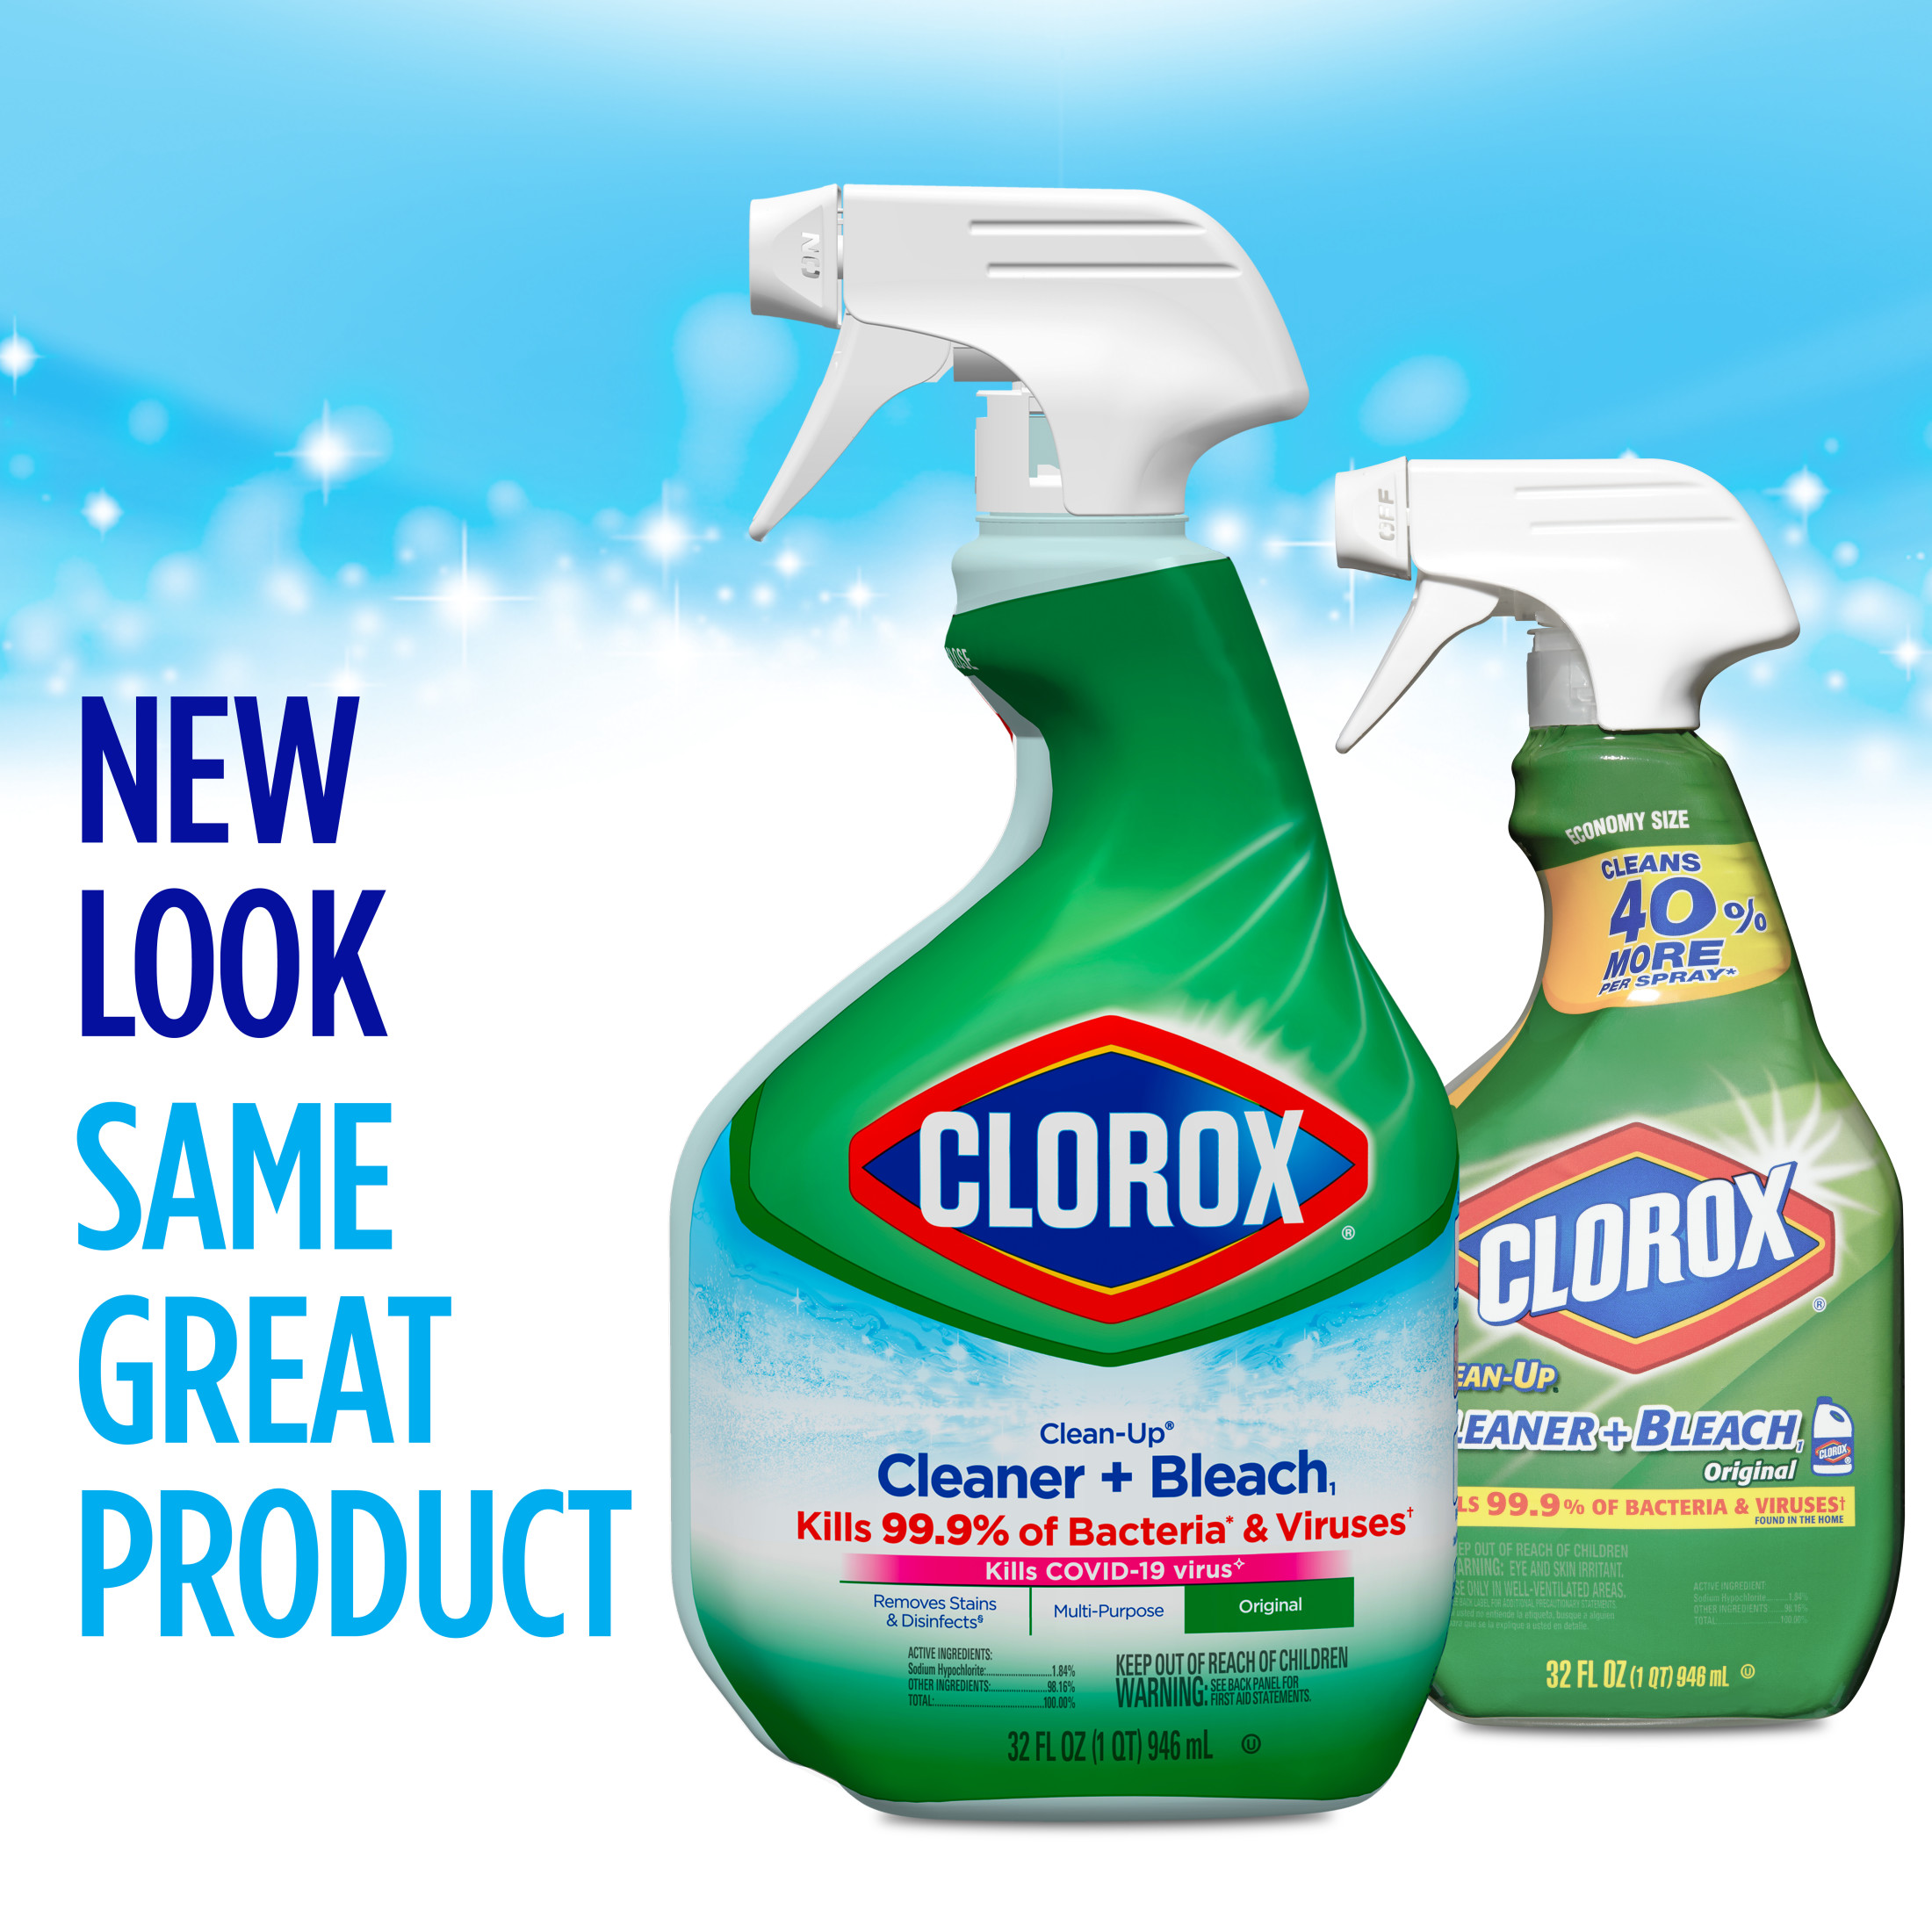 Clorox Clean-Up All Purpose Cleaner with Bleach, Spray Bottle, Original, 32 oz - image 3 of 13